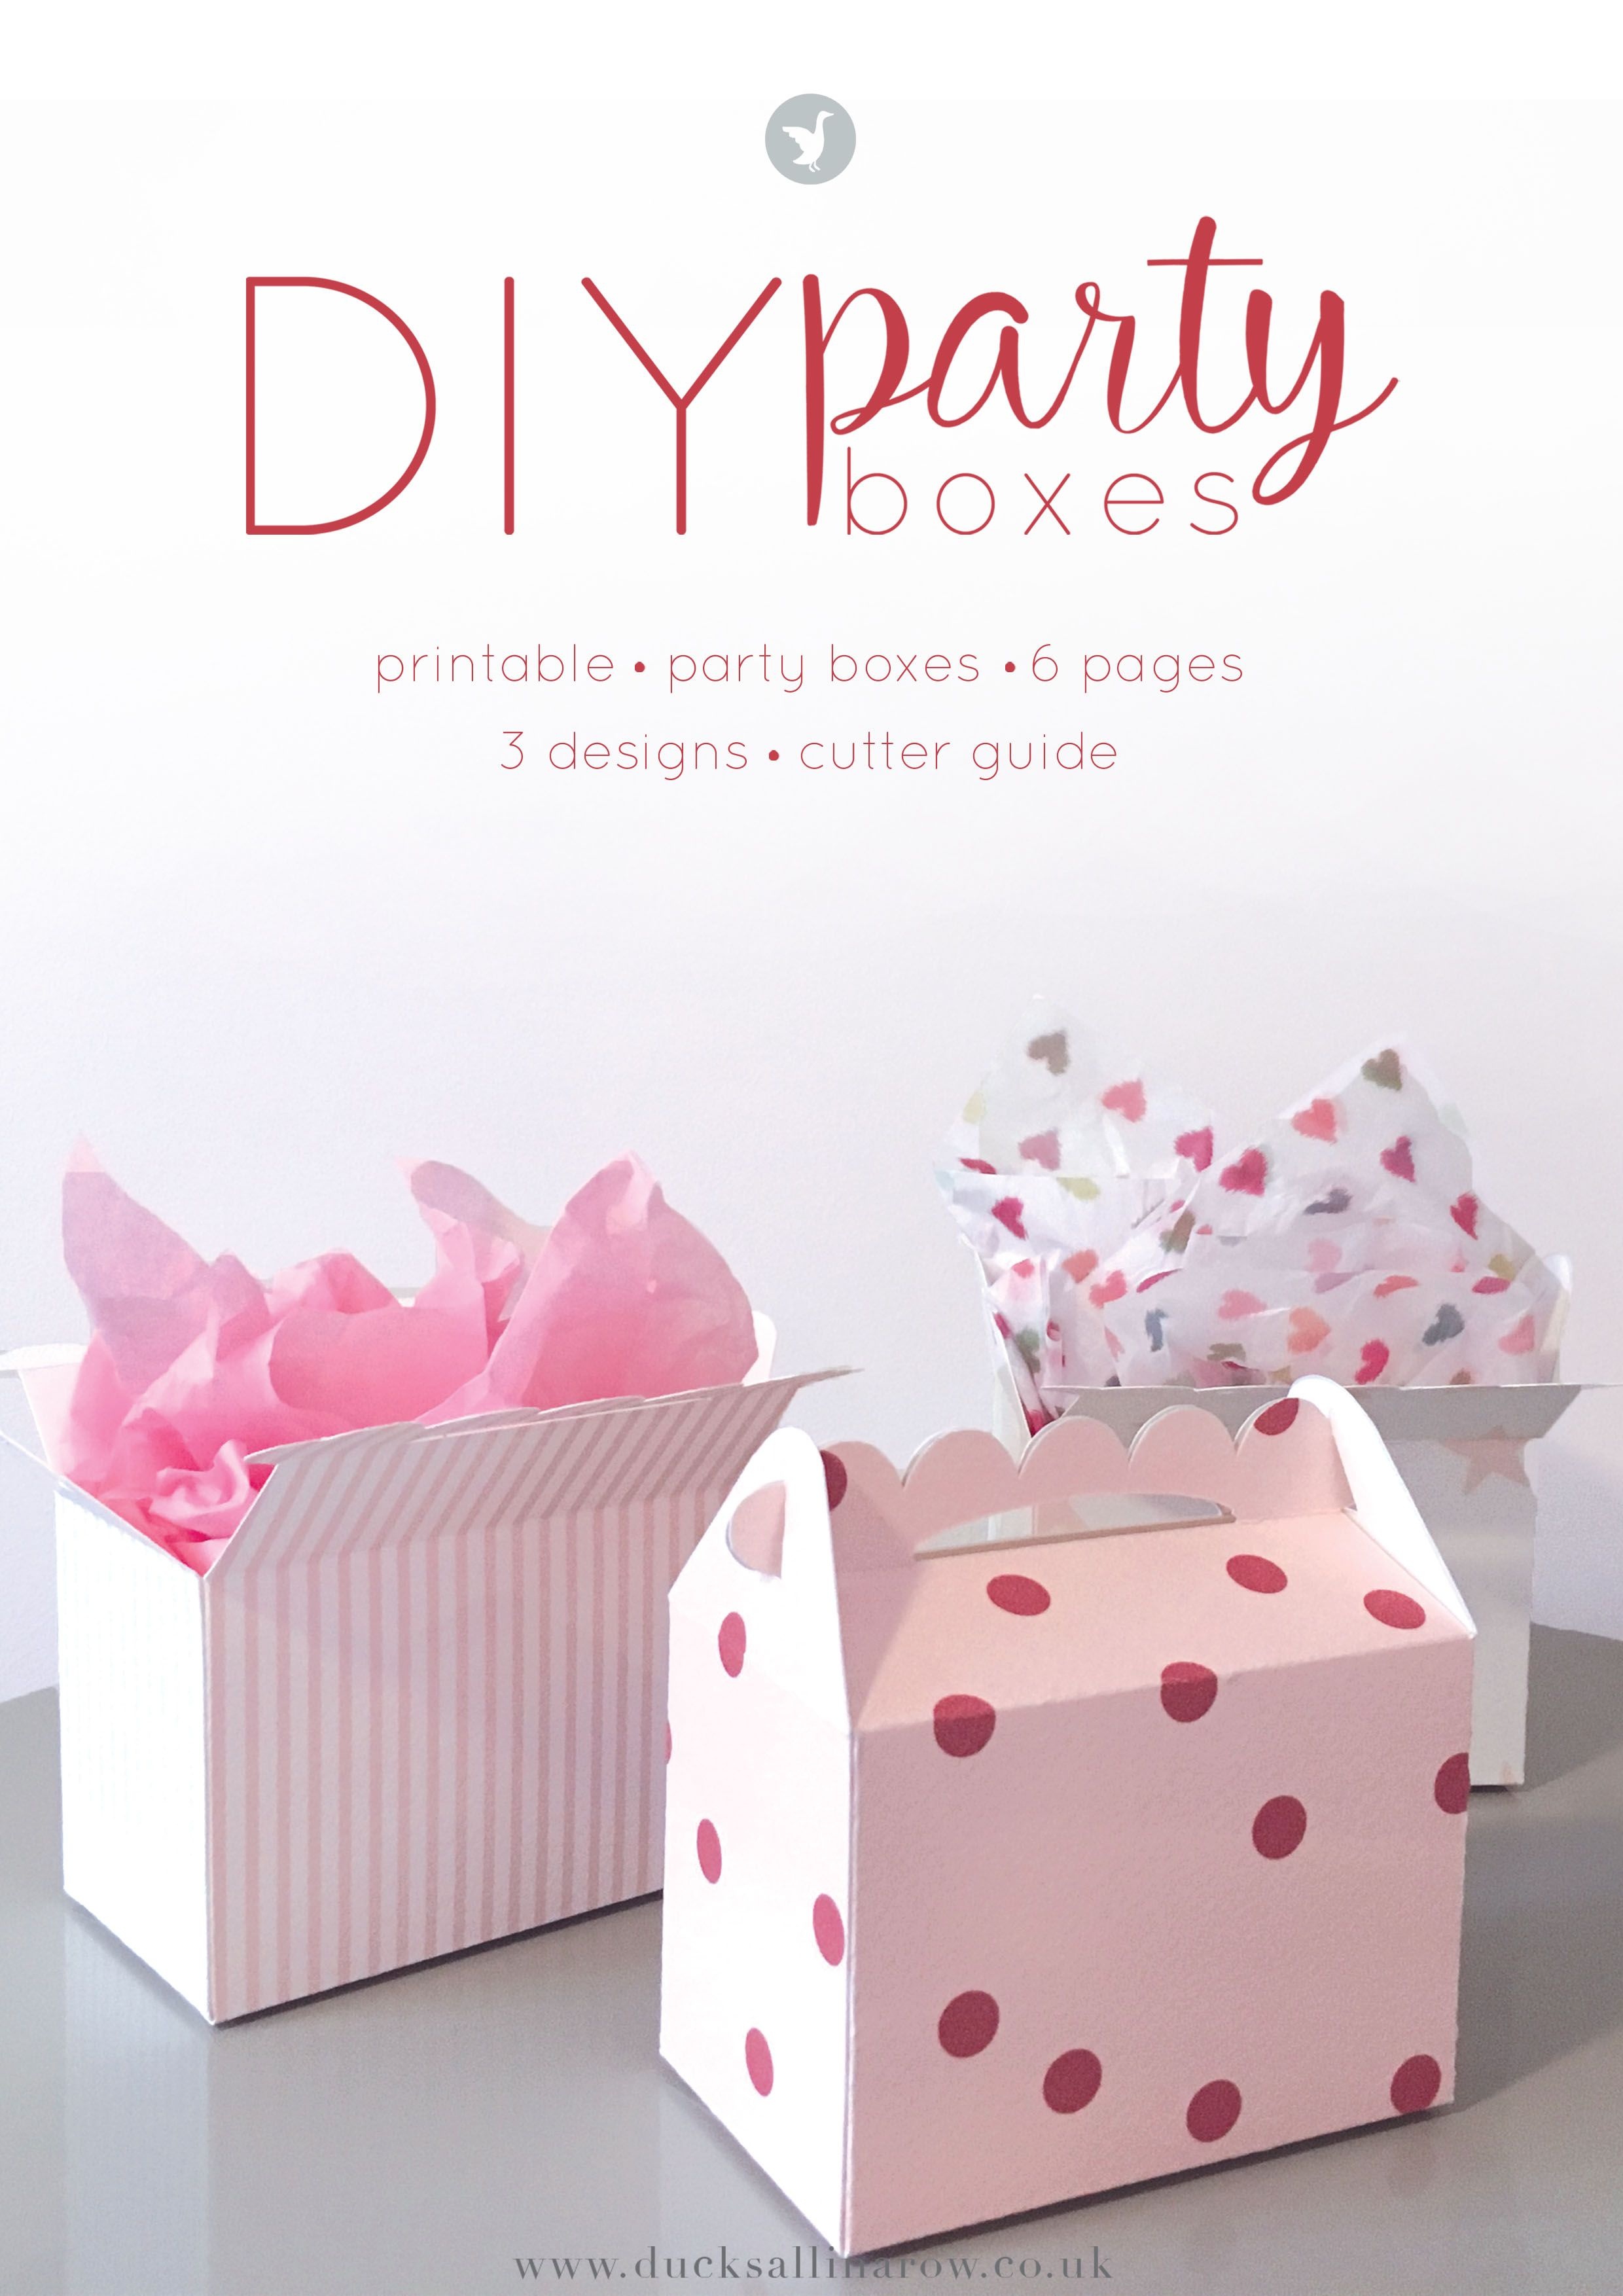 Adorable Diy Party Boxes - Free Printables | Gift Wrapping Ideas - Free Printable Gift Boxes